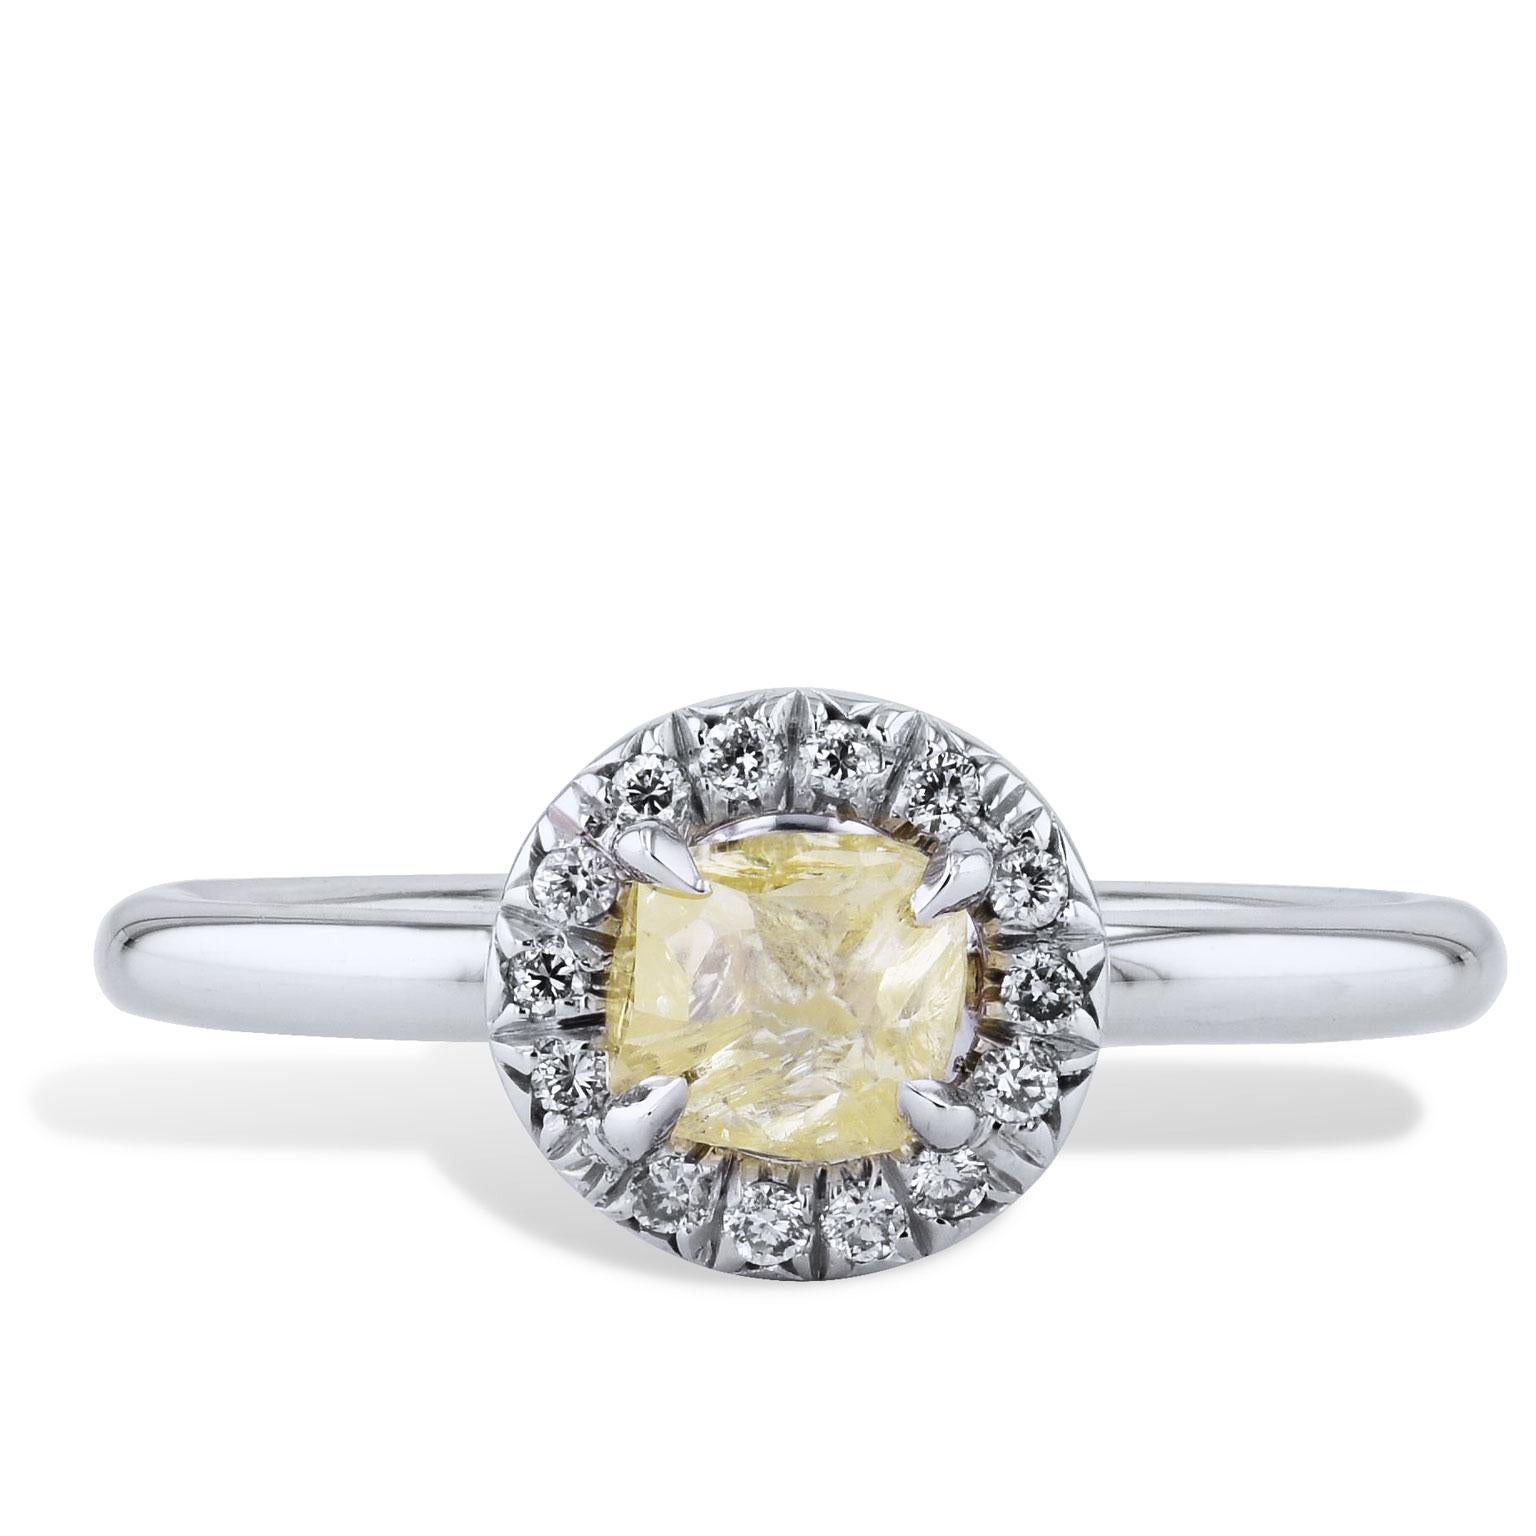 H & H 0.74 Carat Natural Rough Yellow Diamond Engagement Ring in 18 Kt 6

Be astounded by the beauty of natural rough diamonds with this 0.74 carat natural rough yellow diamond featuring 0.09 carat of diamond pave (H/I/SI) encircled around the